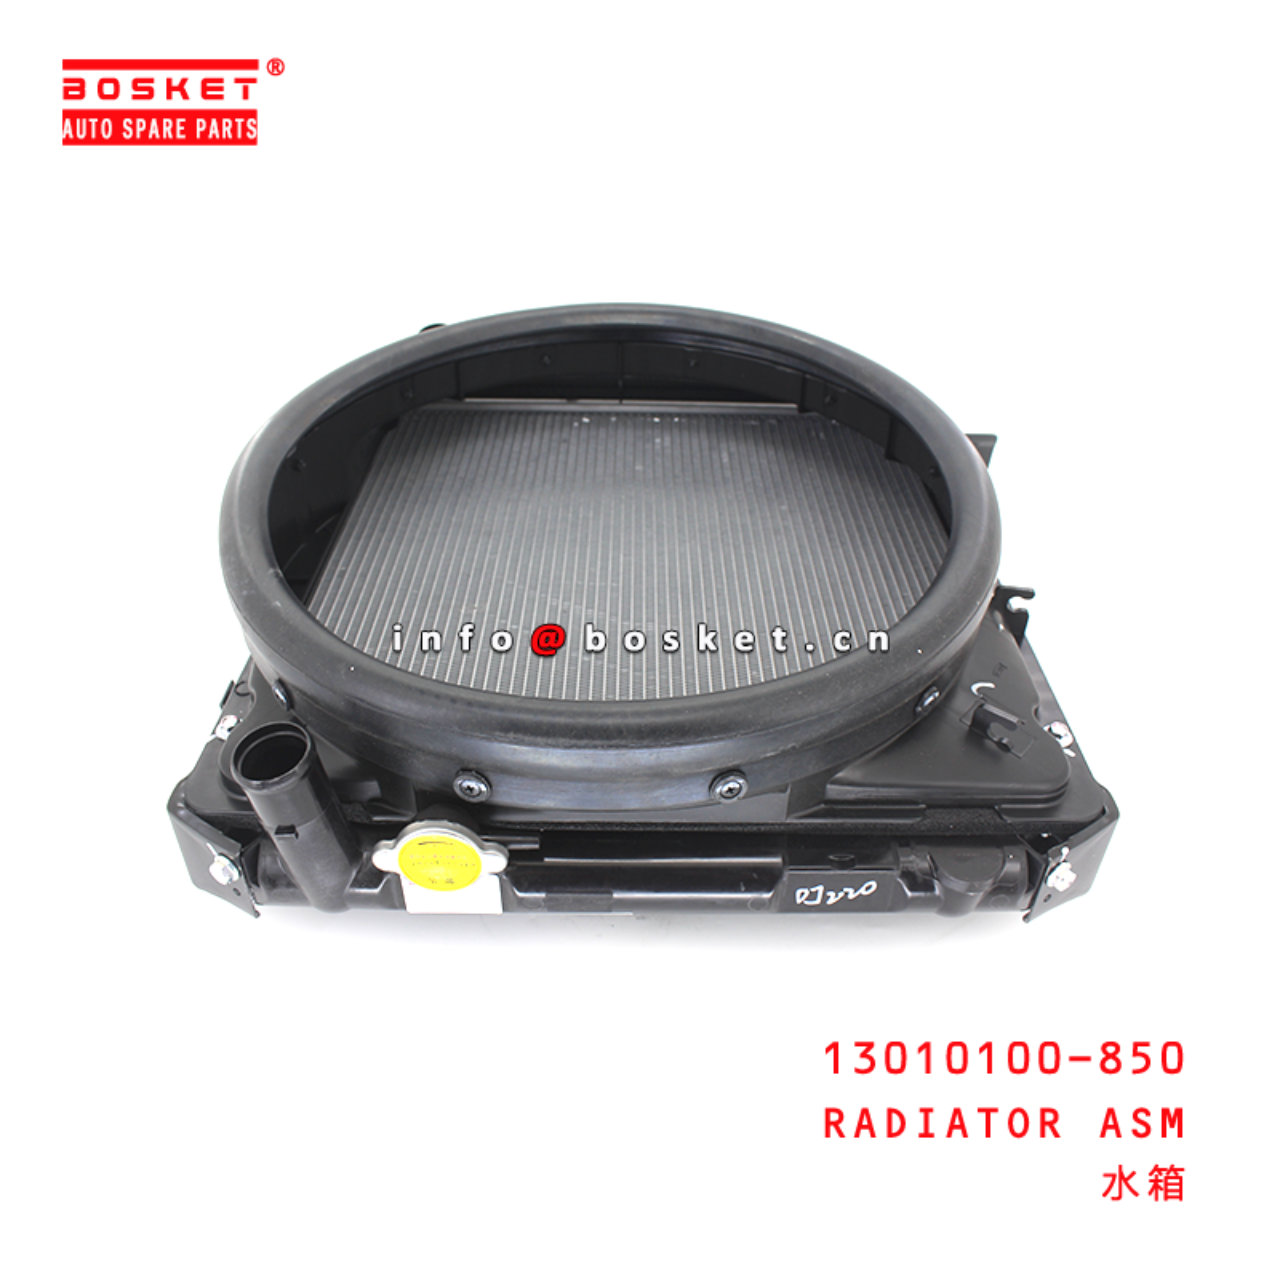 13010100-850 Radiator Assembly suitable for ISUZU NKR77 P600 13010100-850